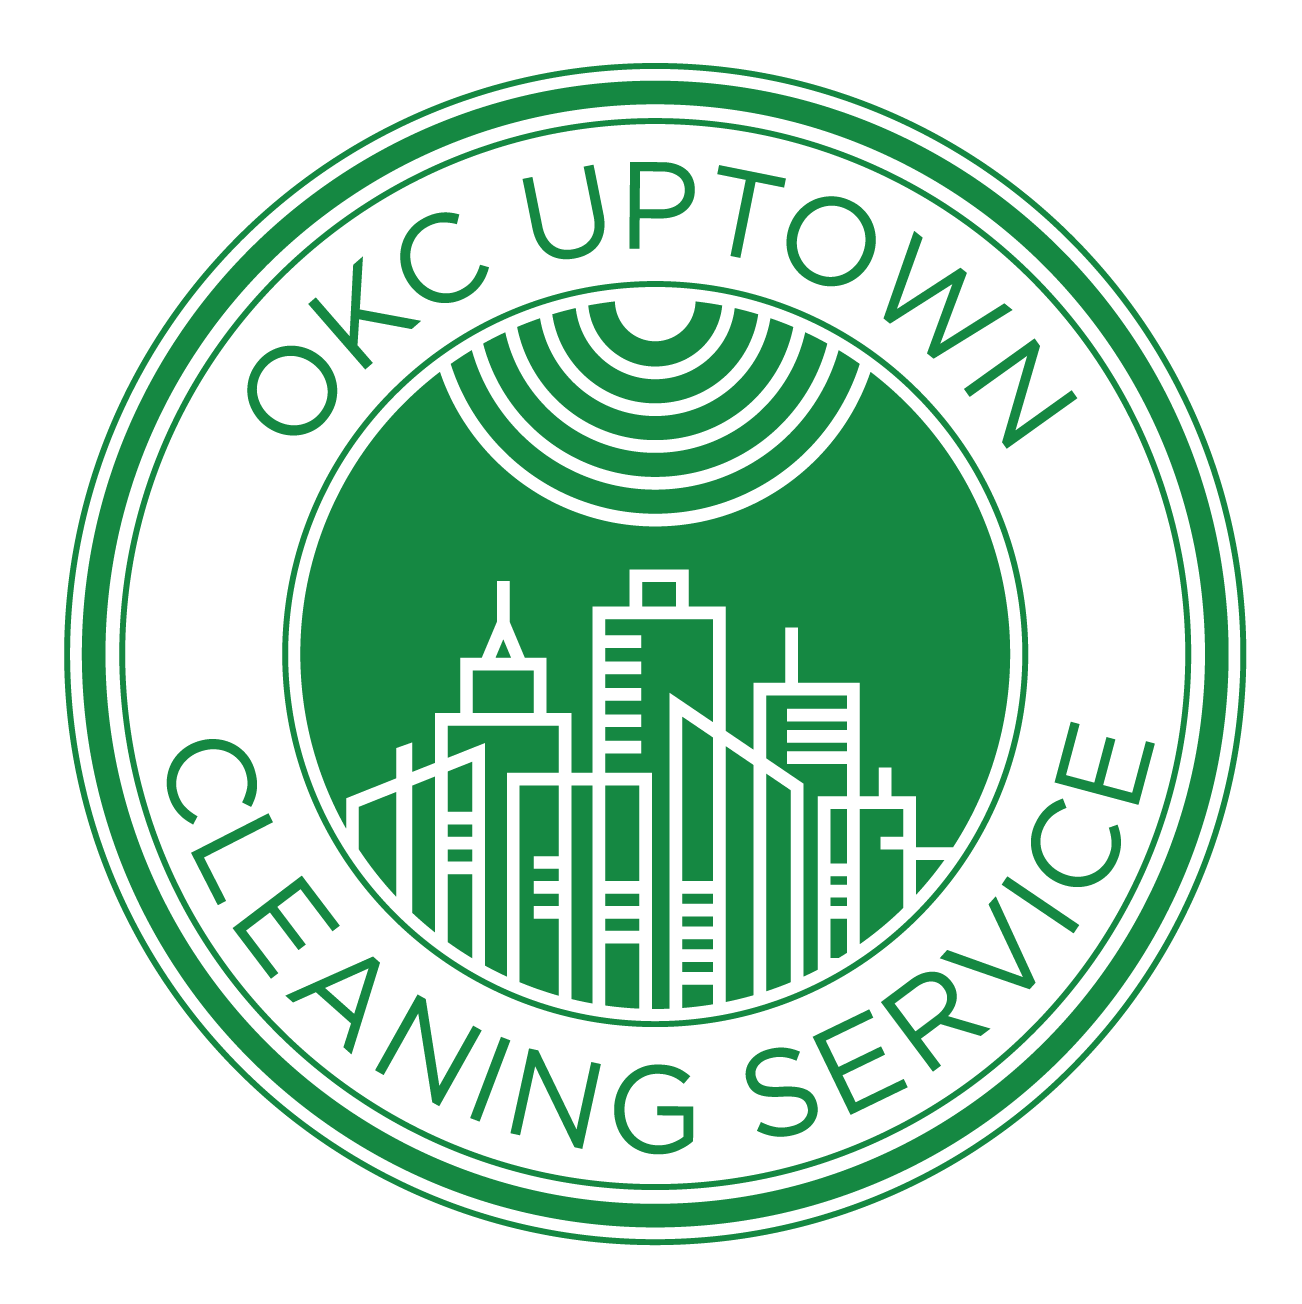 OKC Uptown Cleaning Services Logo